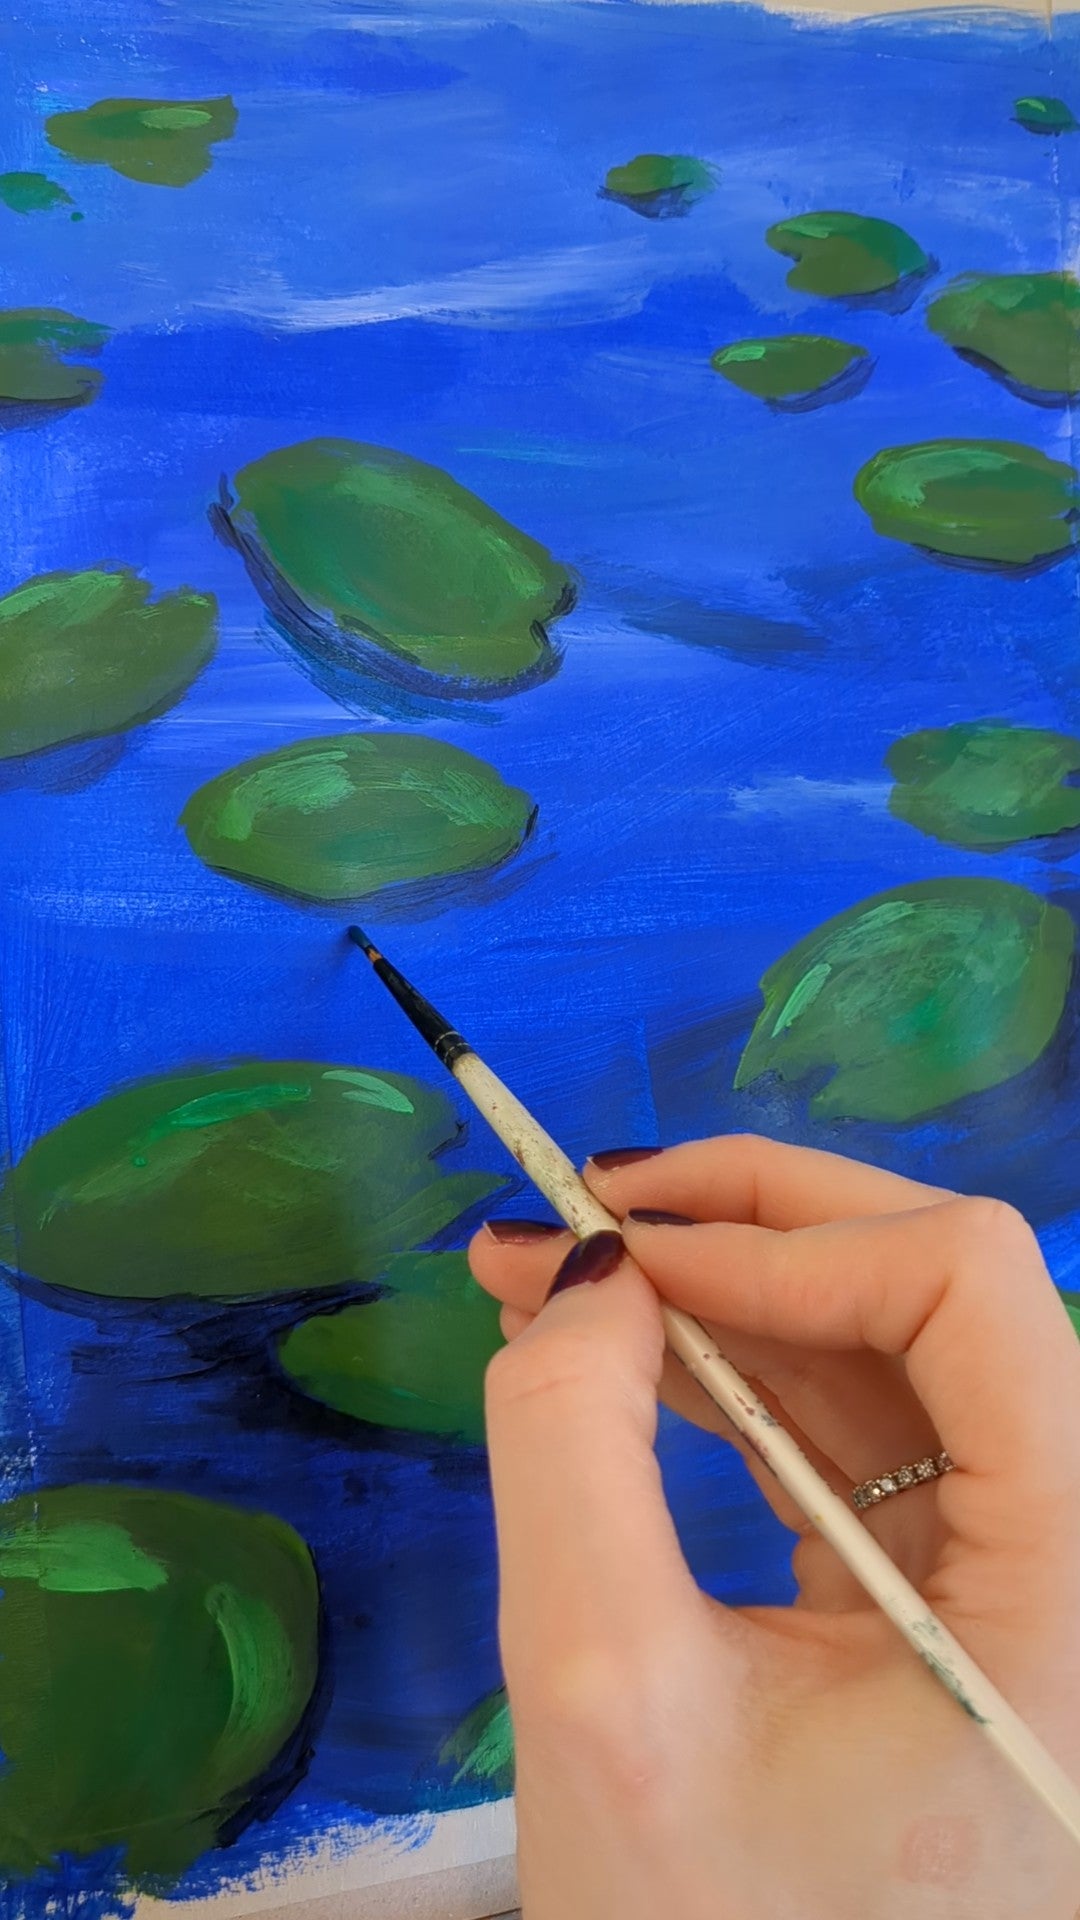 EXPRESSIVE LILY PAD POND - Painting Workshop at The Catcher in The Rye Pub, Finchley, London - 13th MARCH 2024, 7.30pm